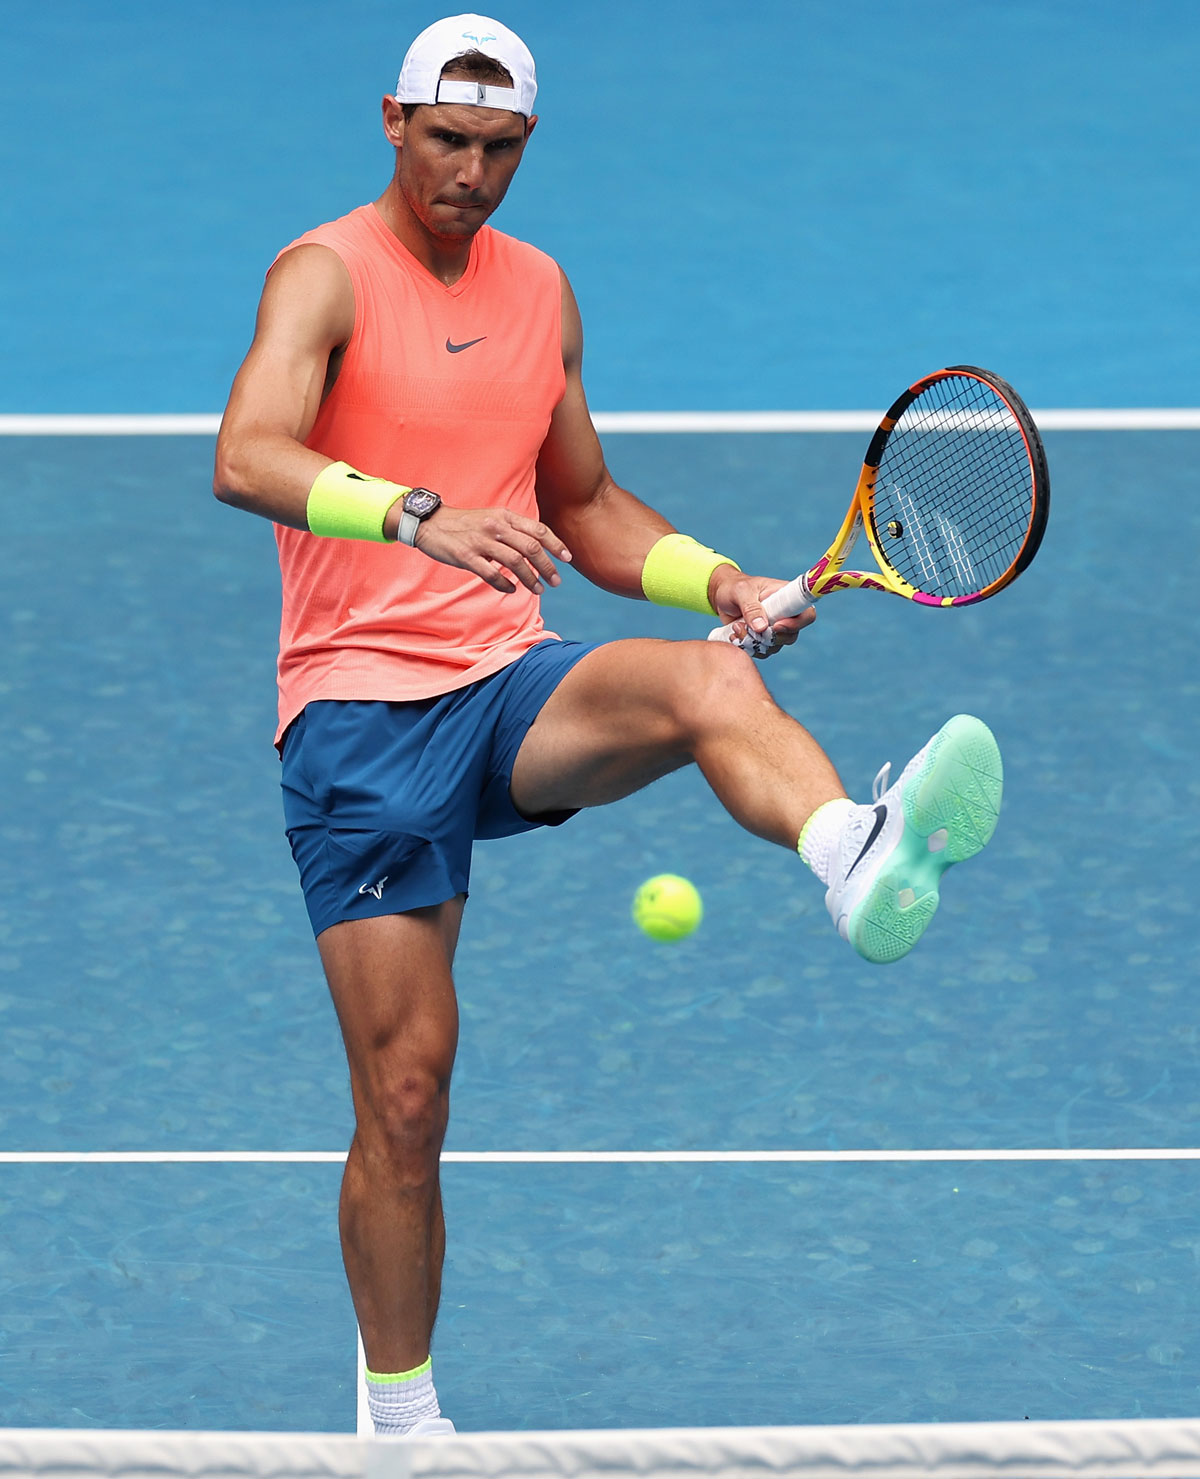 Rafael Nadal hopes to be fully fit for the French Open starting next month